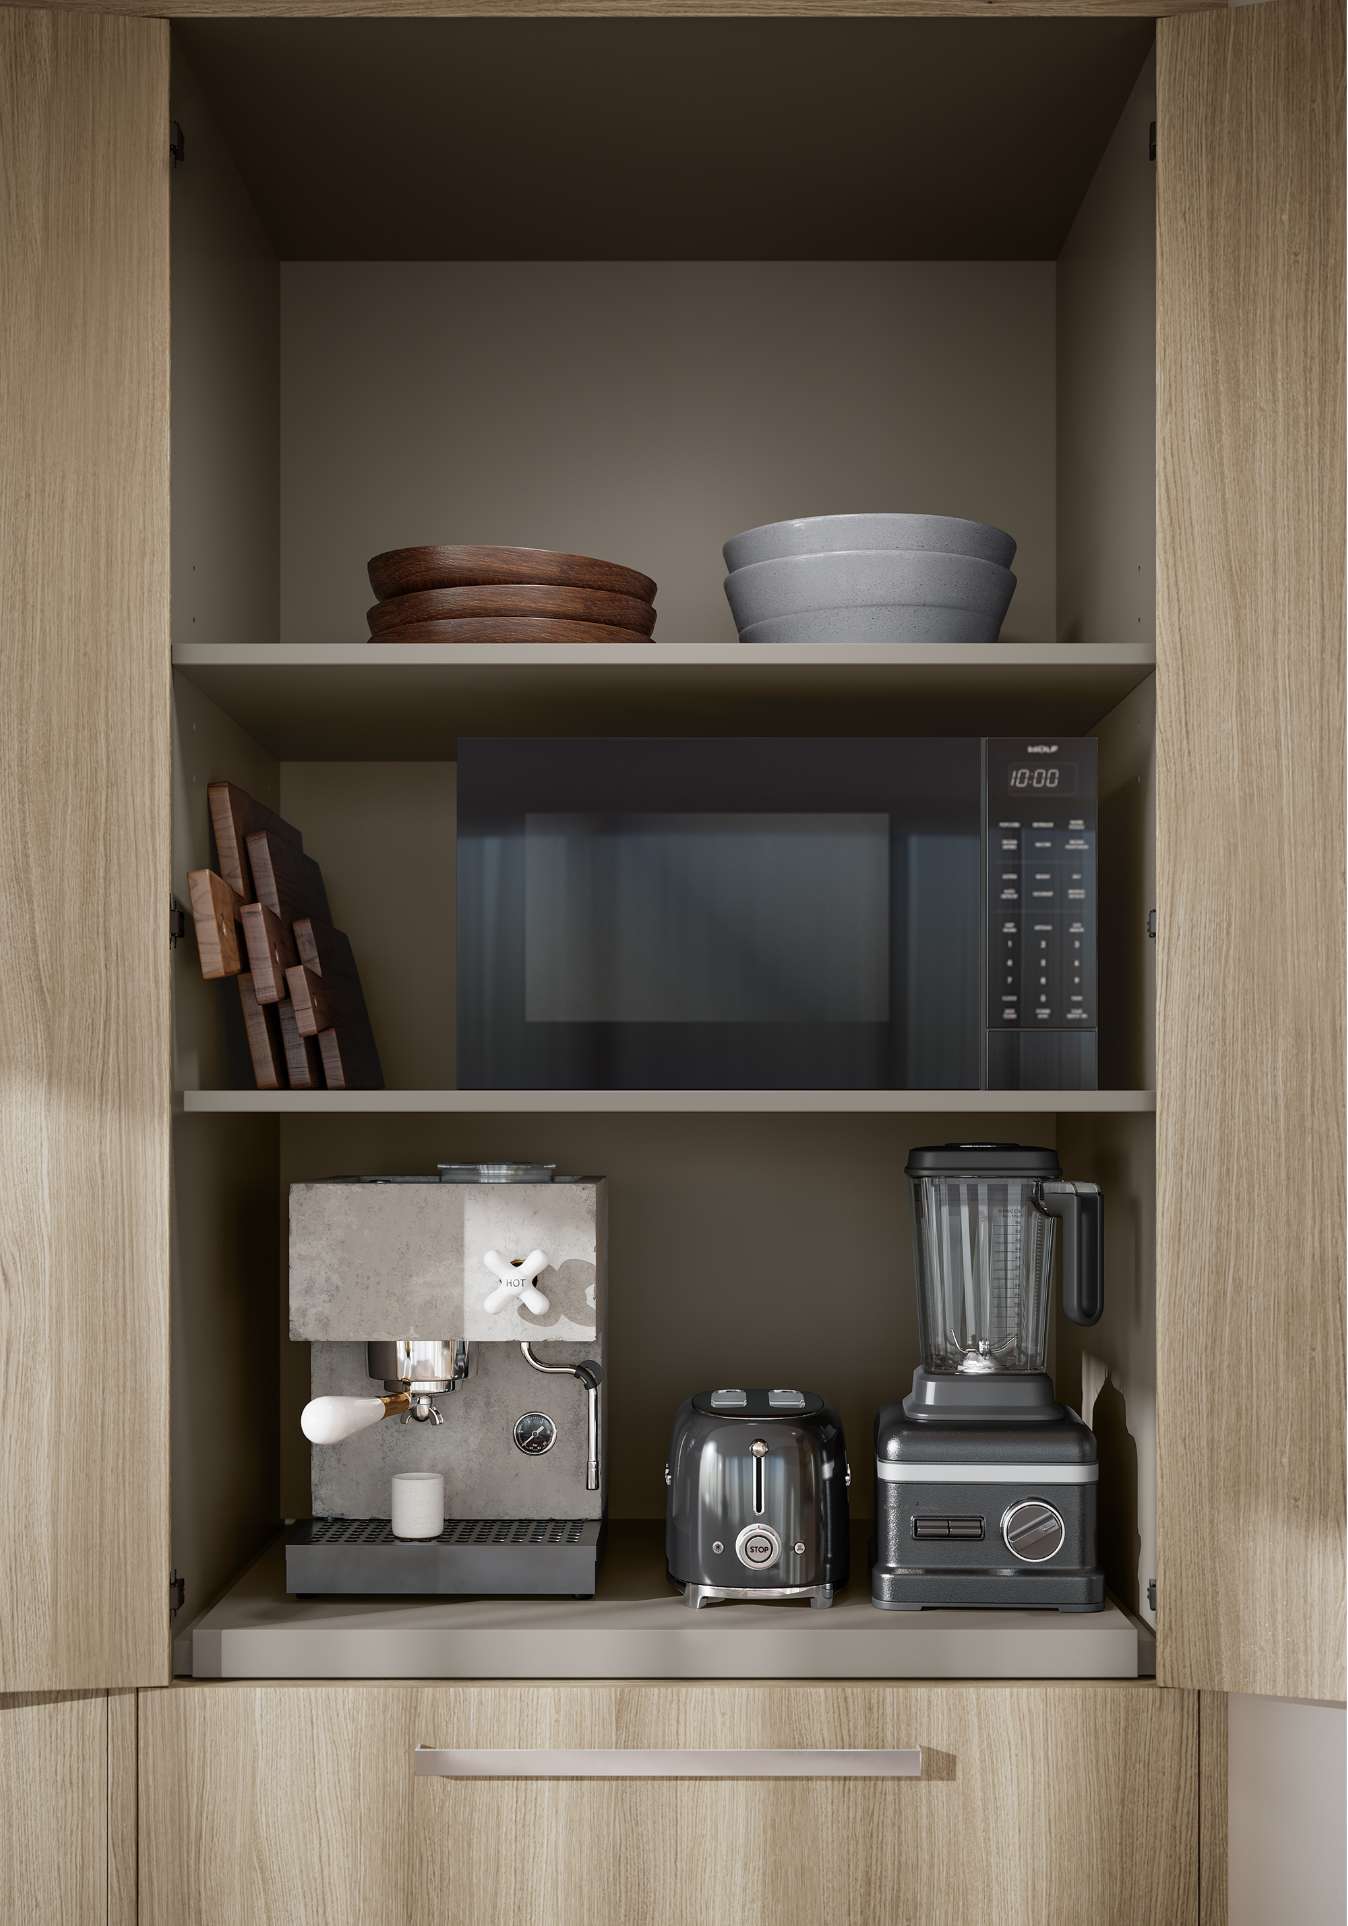 Render of kitchen shelf with plates, bowls, and various appliances